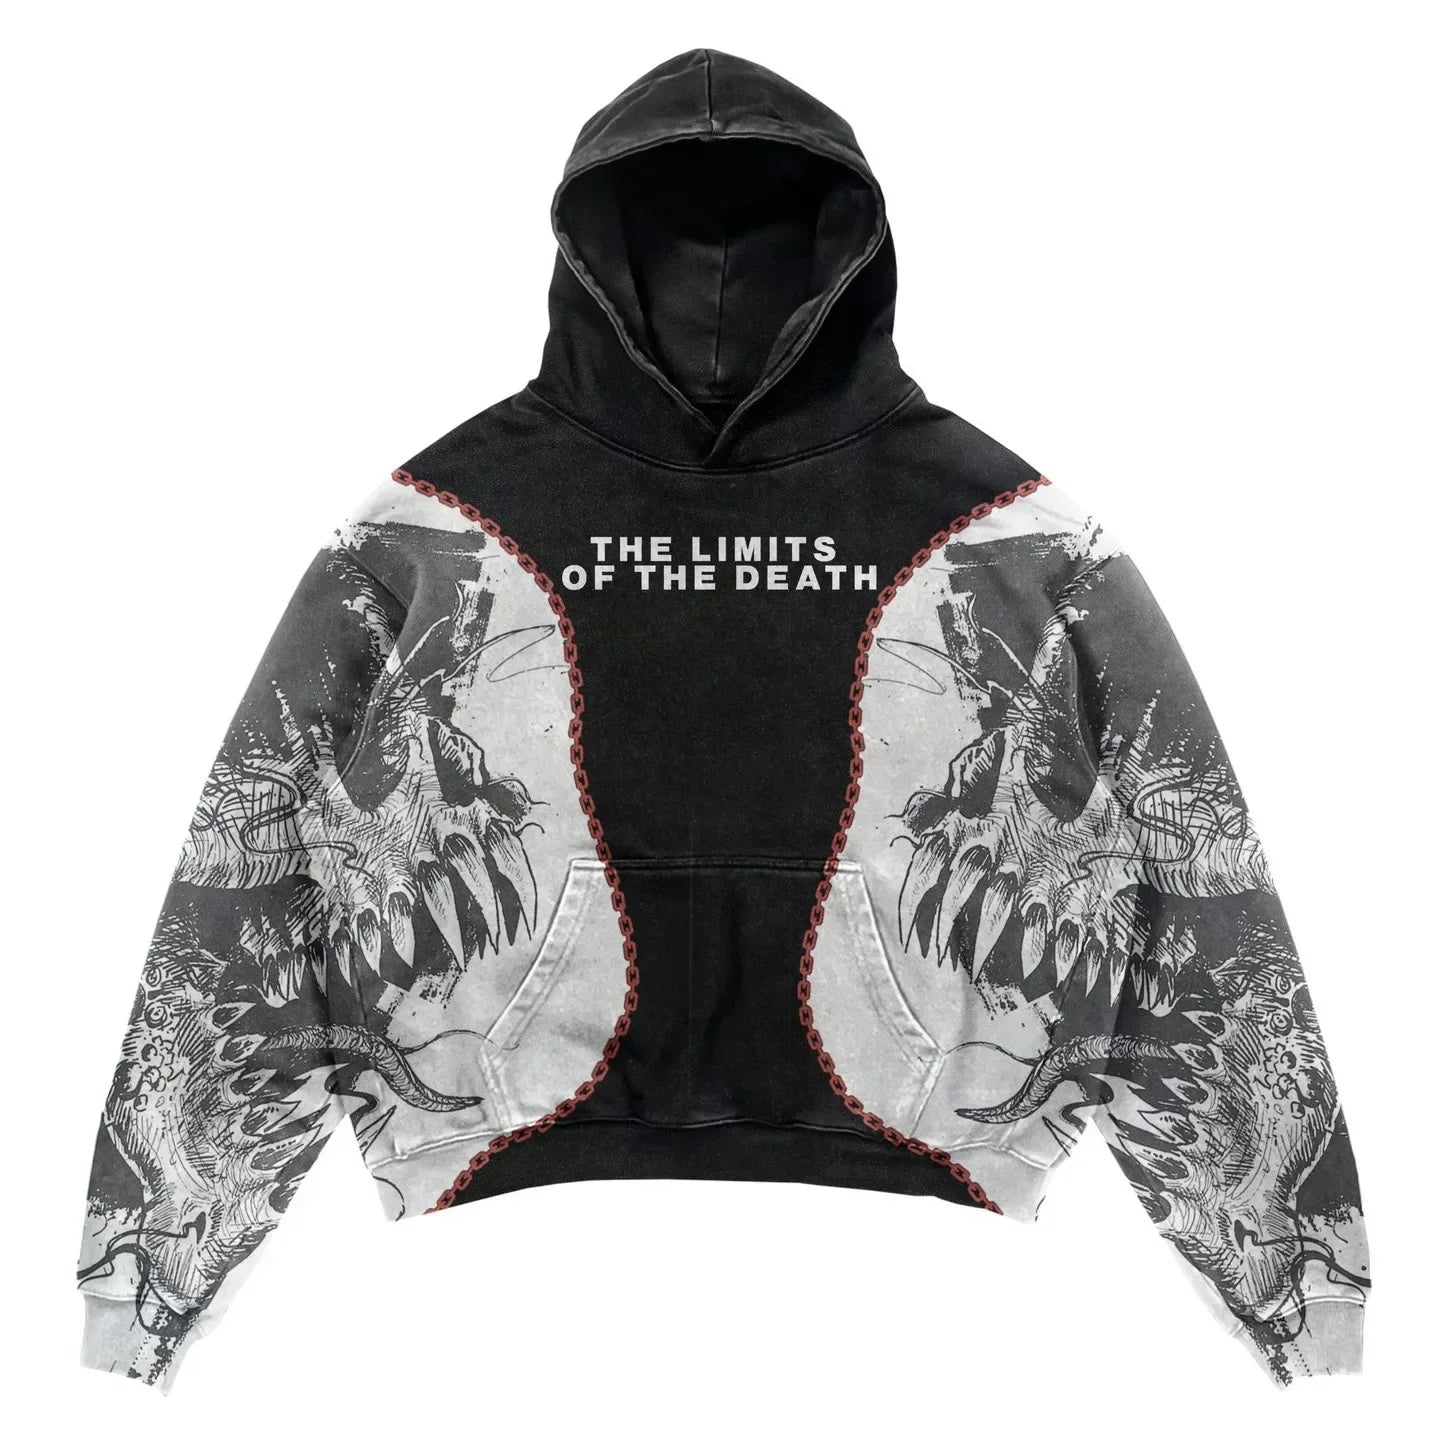 A punk style hoodie perfect for four seasons wear, featuring the text "THE LIMITS OF THE DEATH" on the chest and a graphic design with skeletal and claw images along the arms and torso. Perfect for those who appreciate edgy men's hoodies, the Maramalive™ Explosions Printed Skull Y2K Retro Hooded Sweater Coat Street Style Gothic Casual Fashion Hooded Sweater Men's Female is an ideal choice.